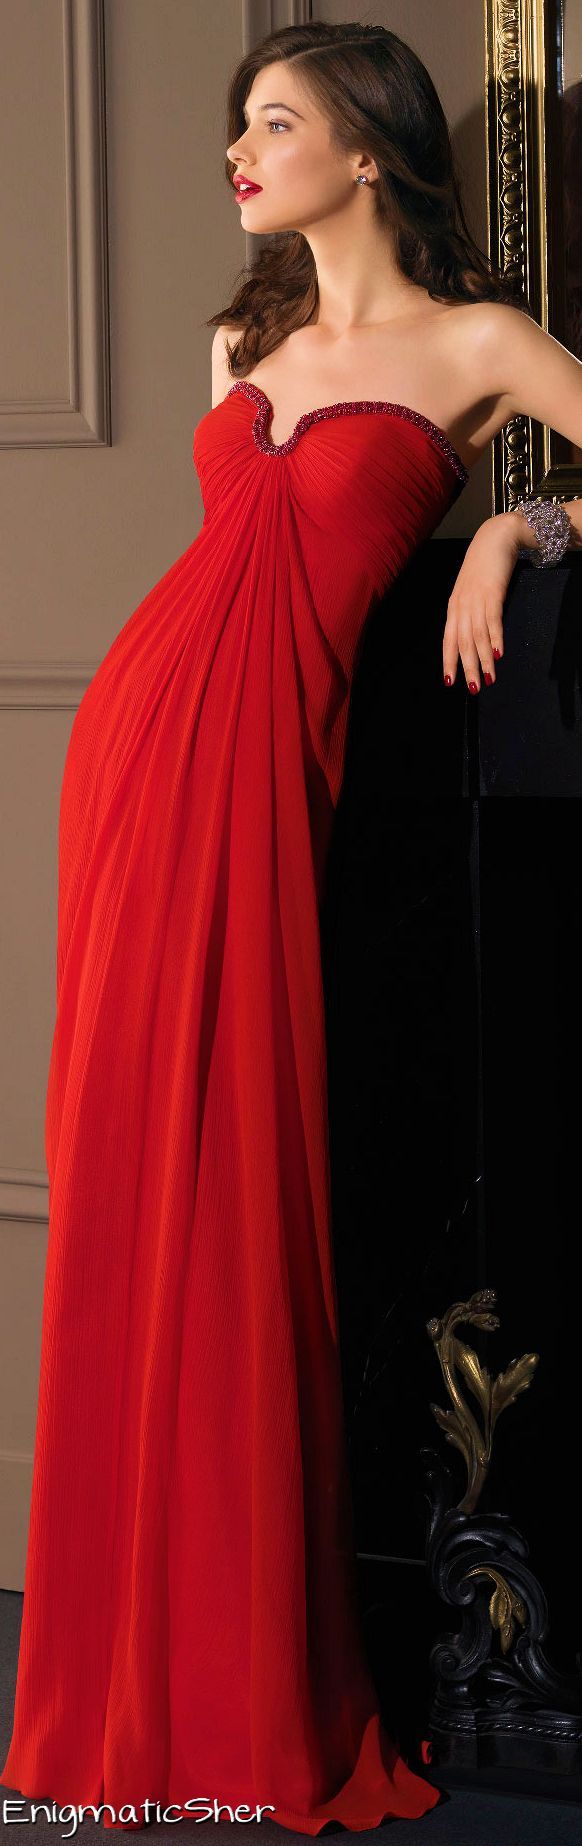 gorgeous red cocktail gown.